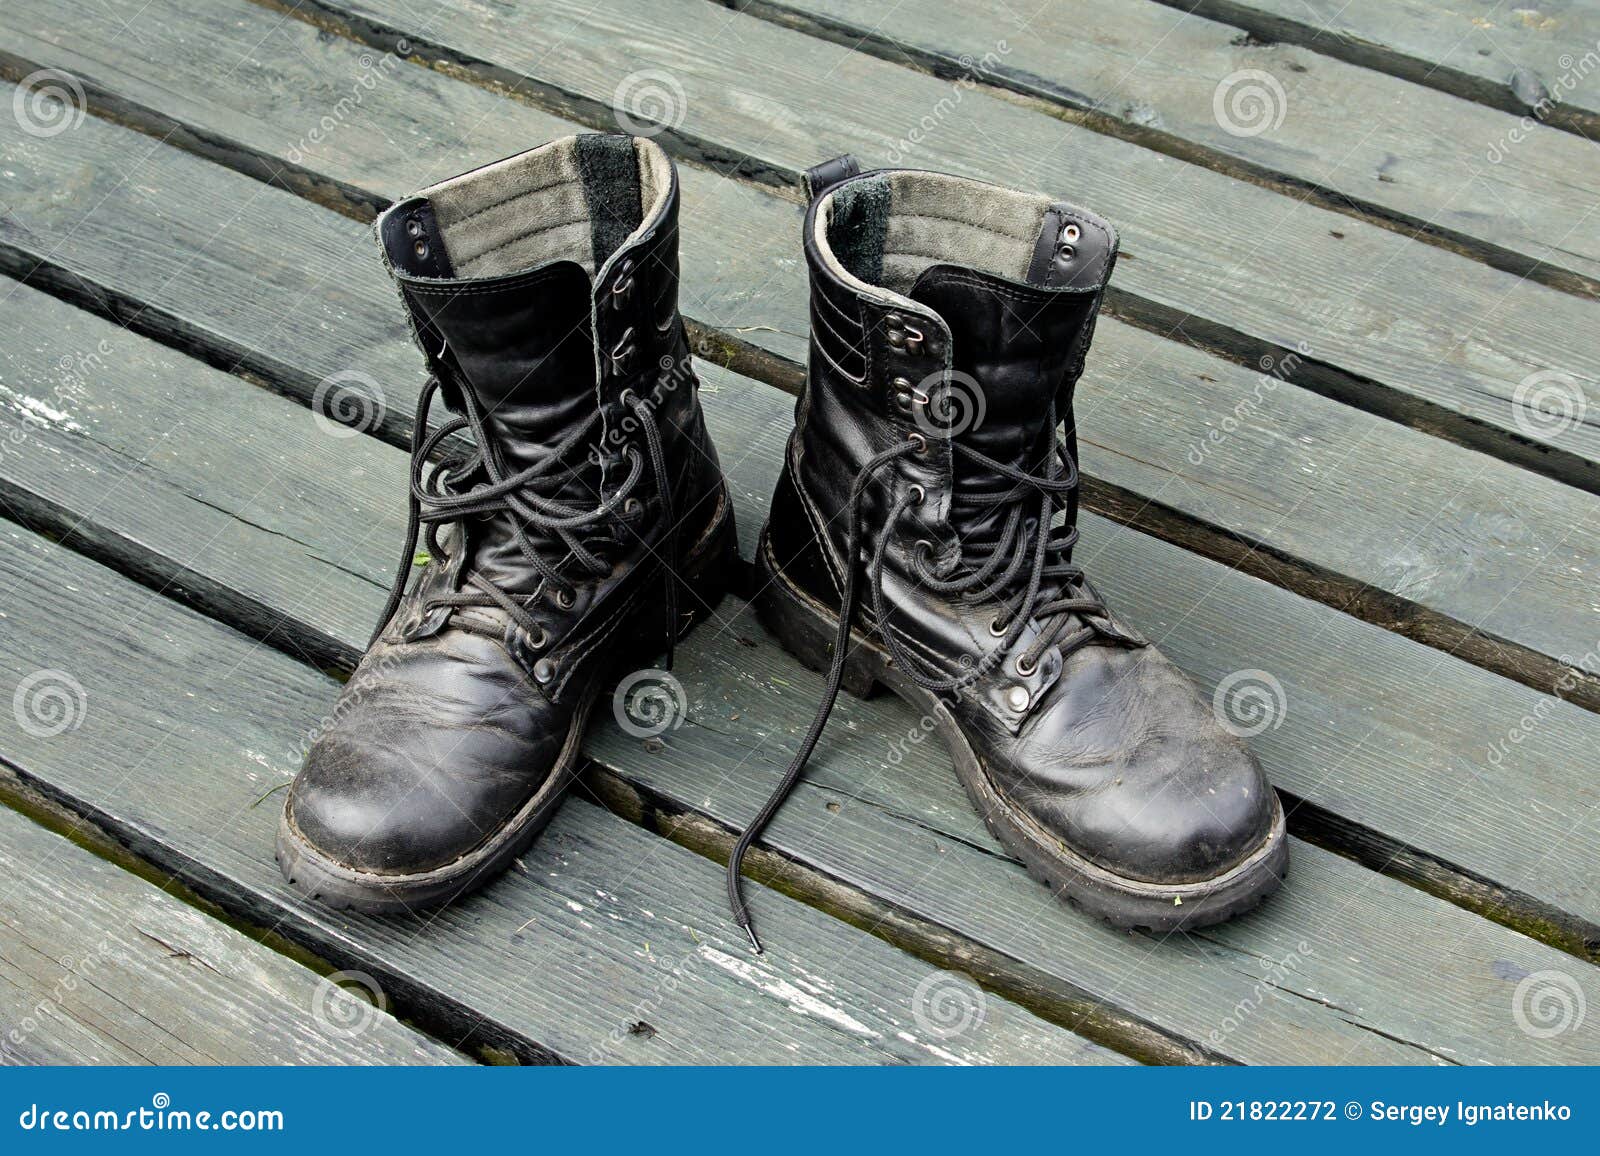 Old leather military boots stock photo. Image of boards - 21822272